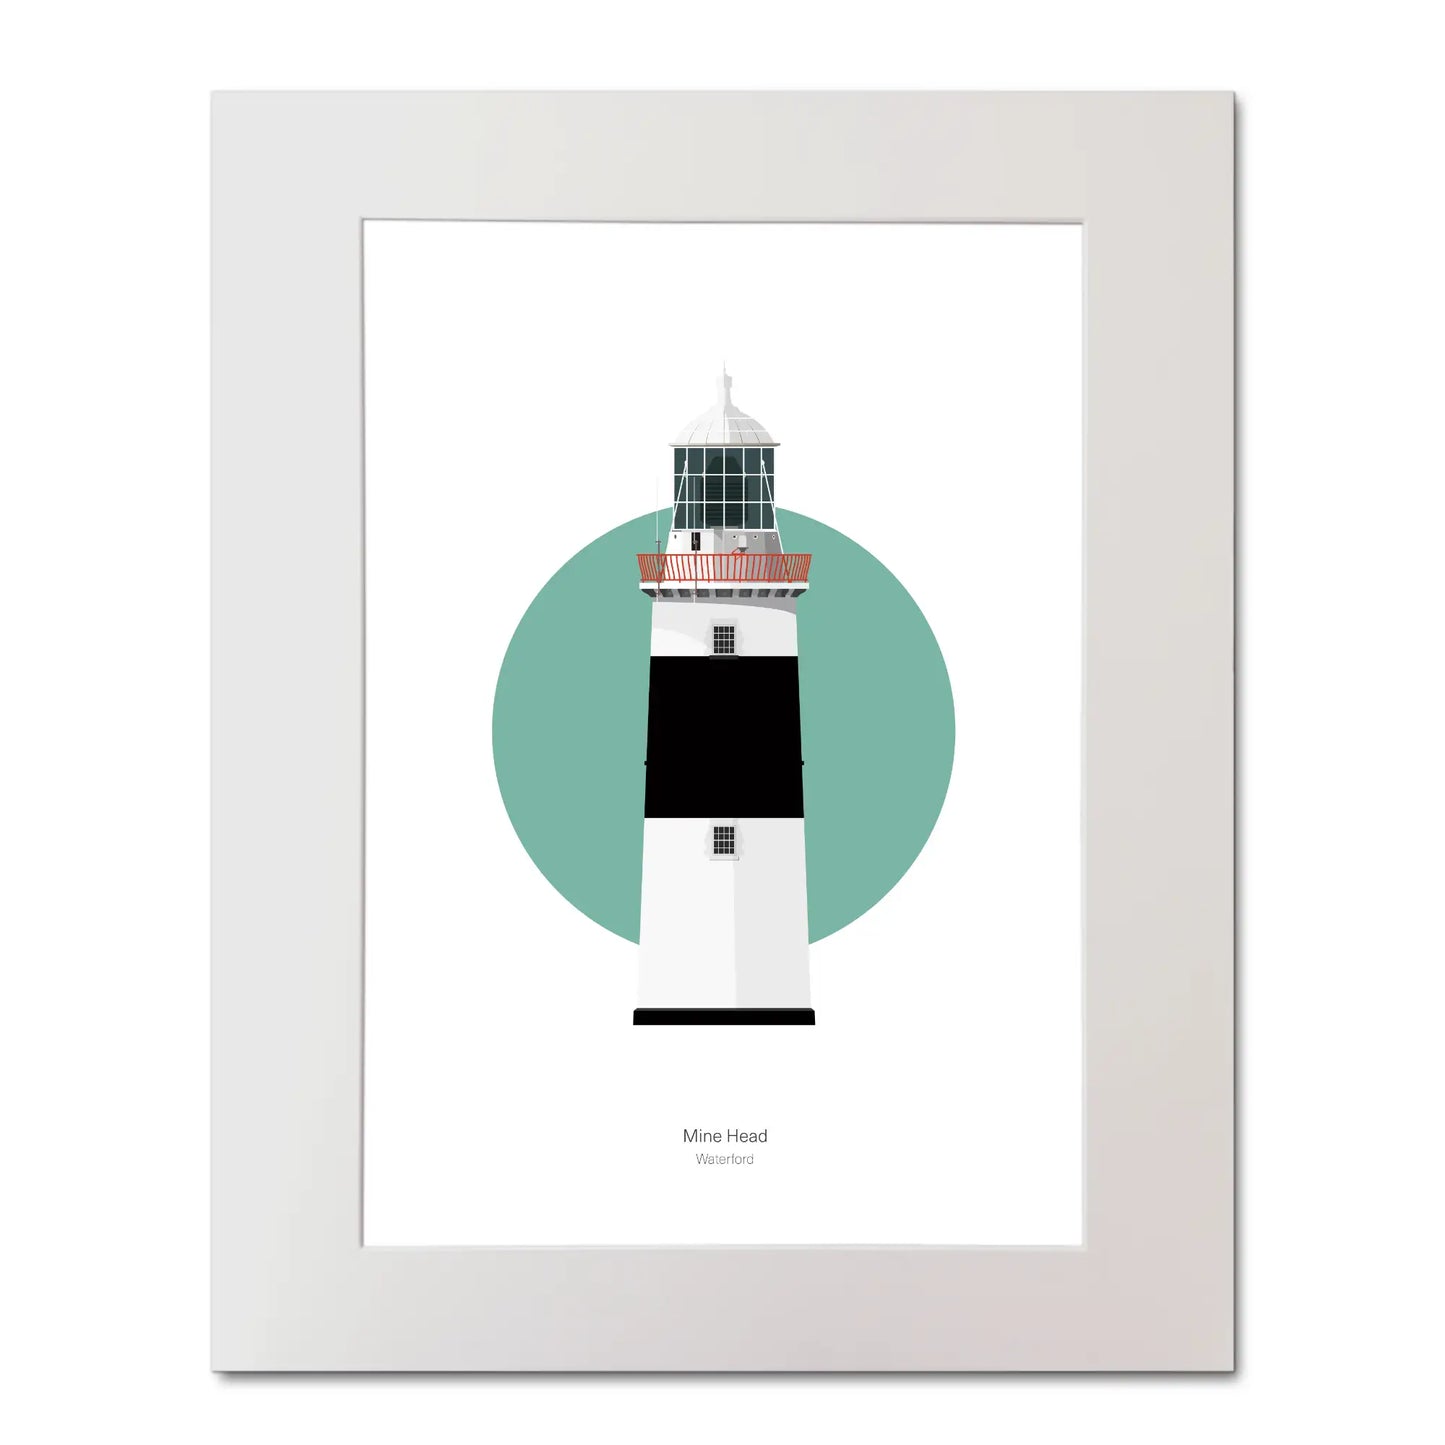 Illustration of Mine Head lighthouse on a white background inside light blue square, mounted and measuring 40x50cm.